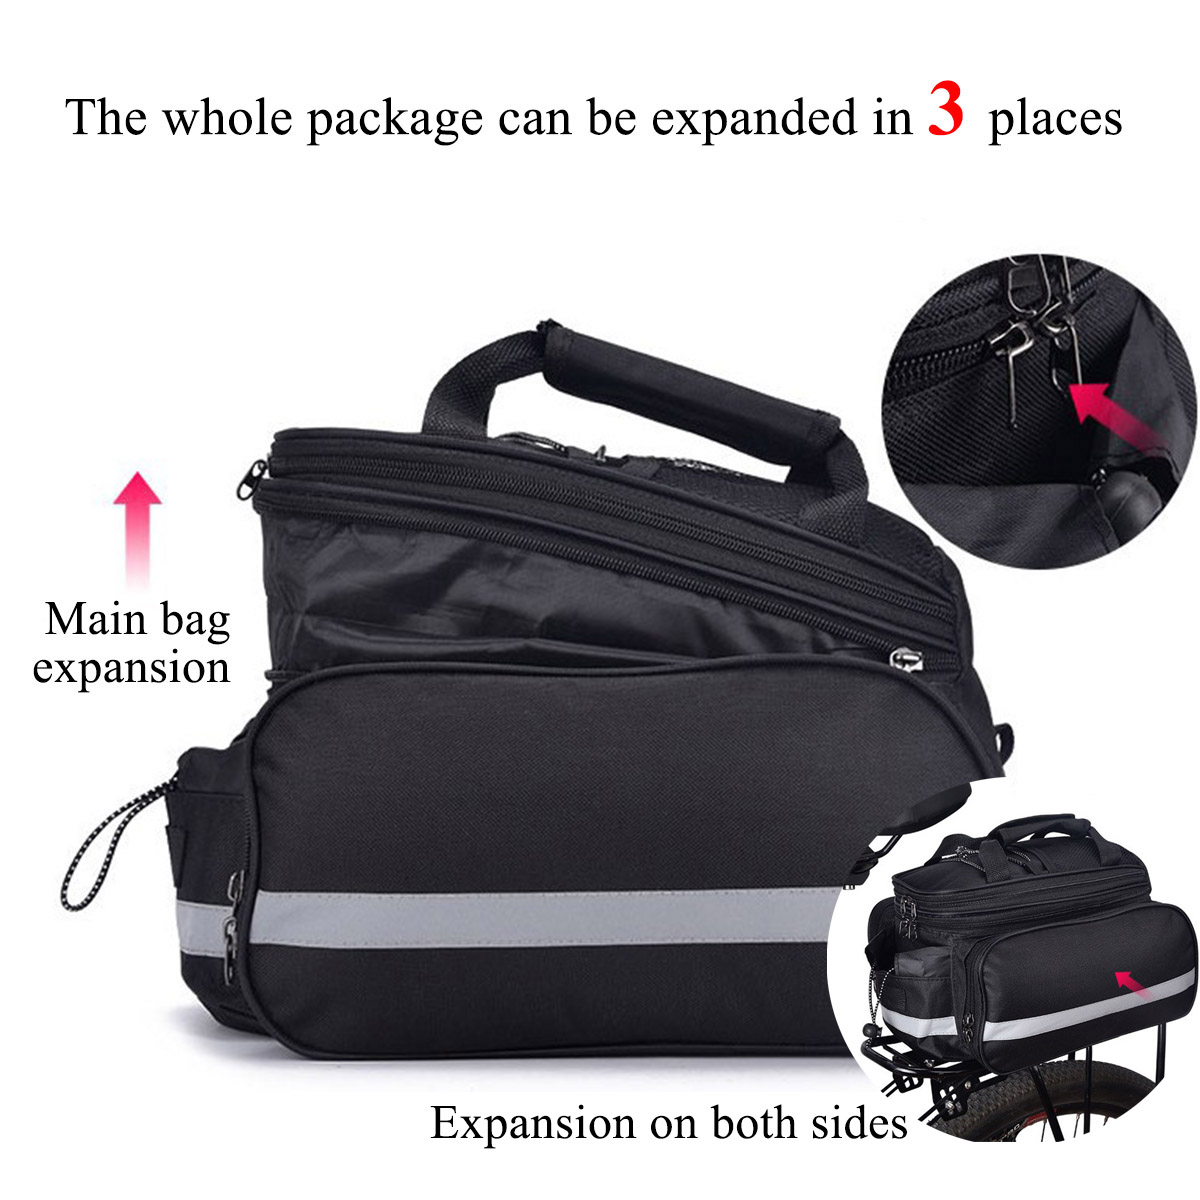 27L-Bicycle-Riding-Package-Large-Capacity-Waterproof-Reflective-Strips-Outdoor-Riding-Bag-1874551-6